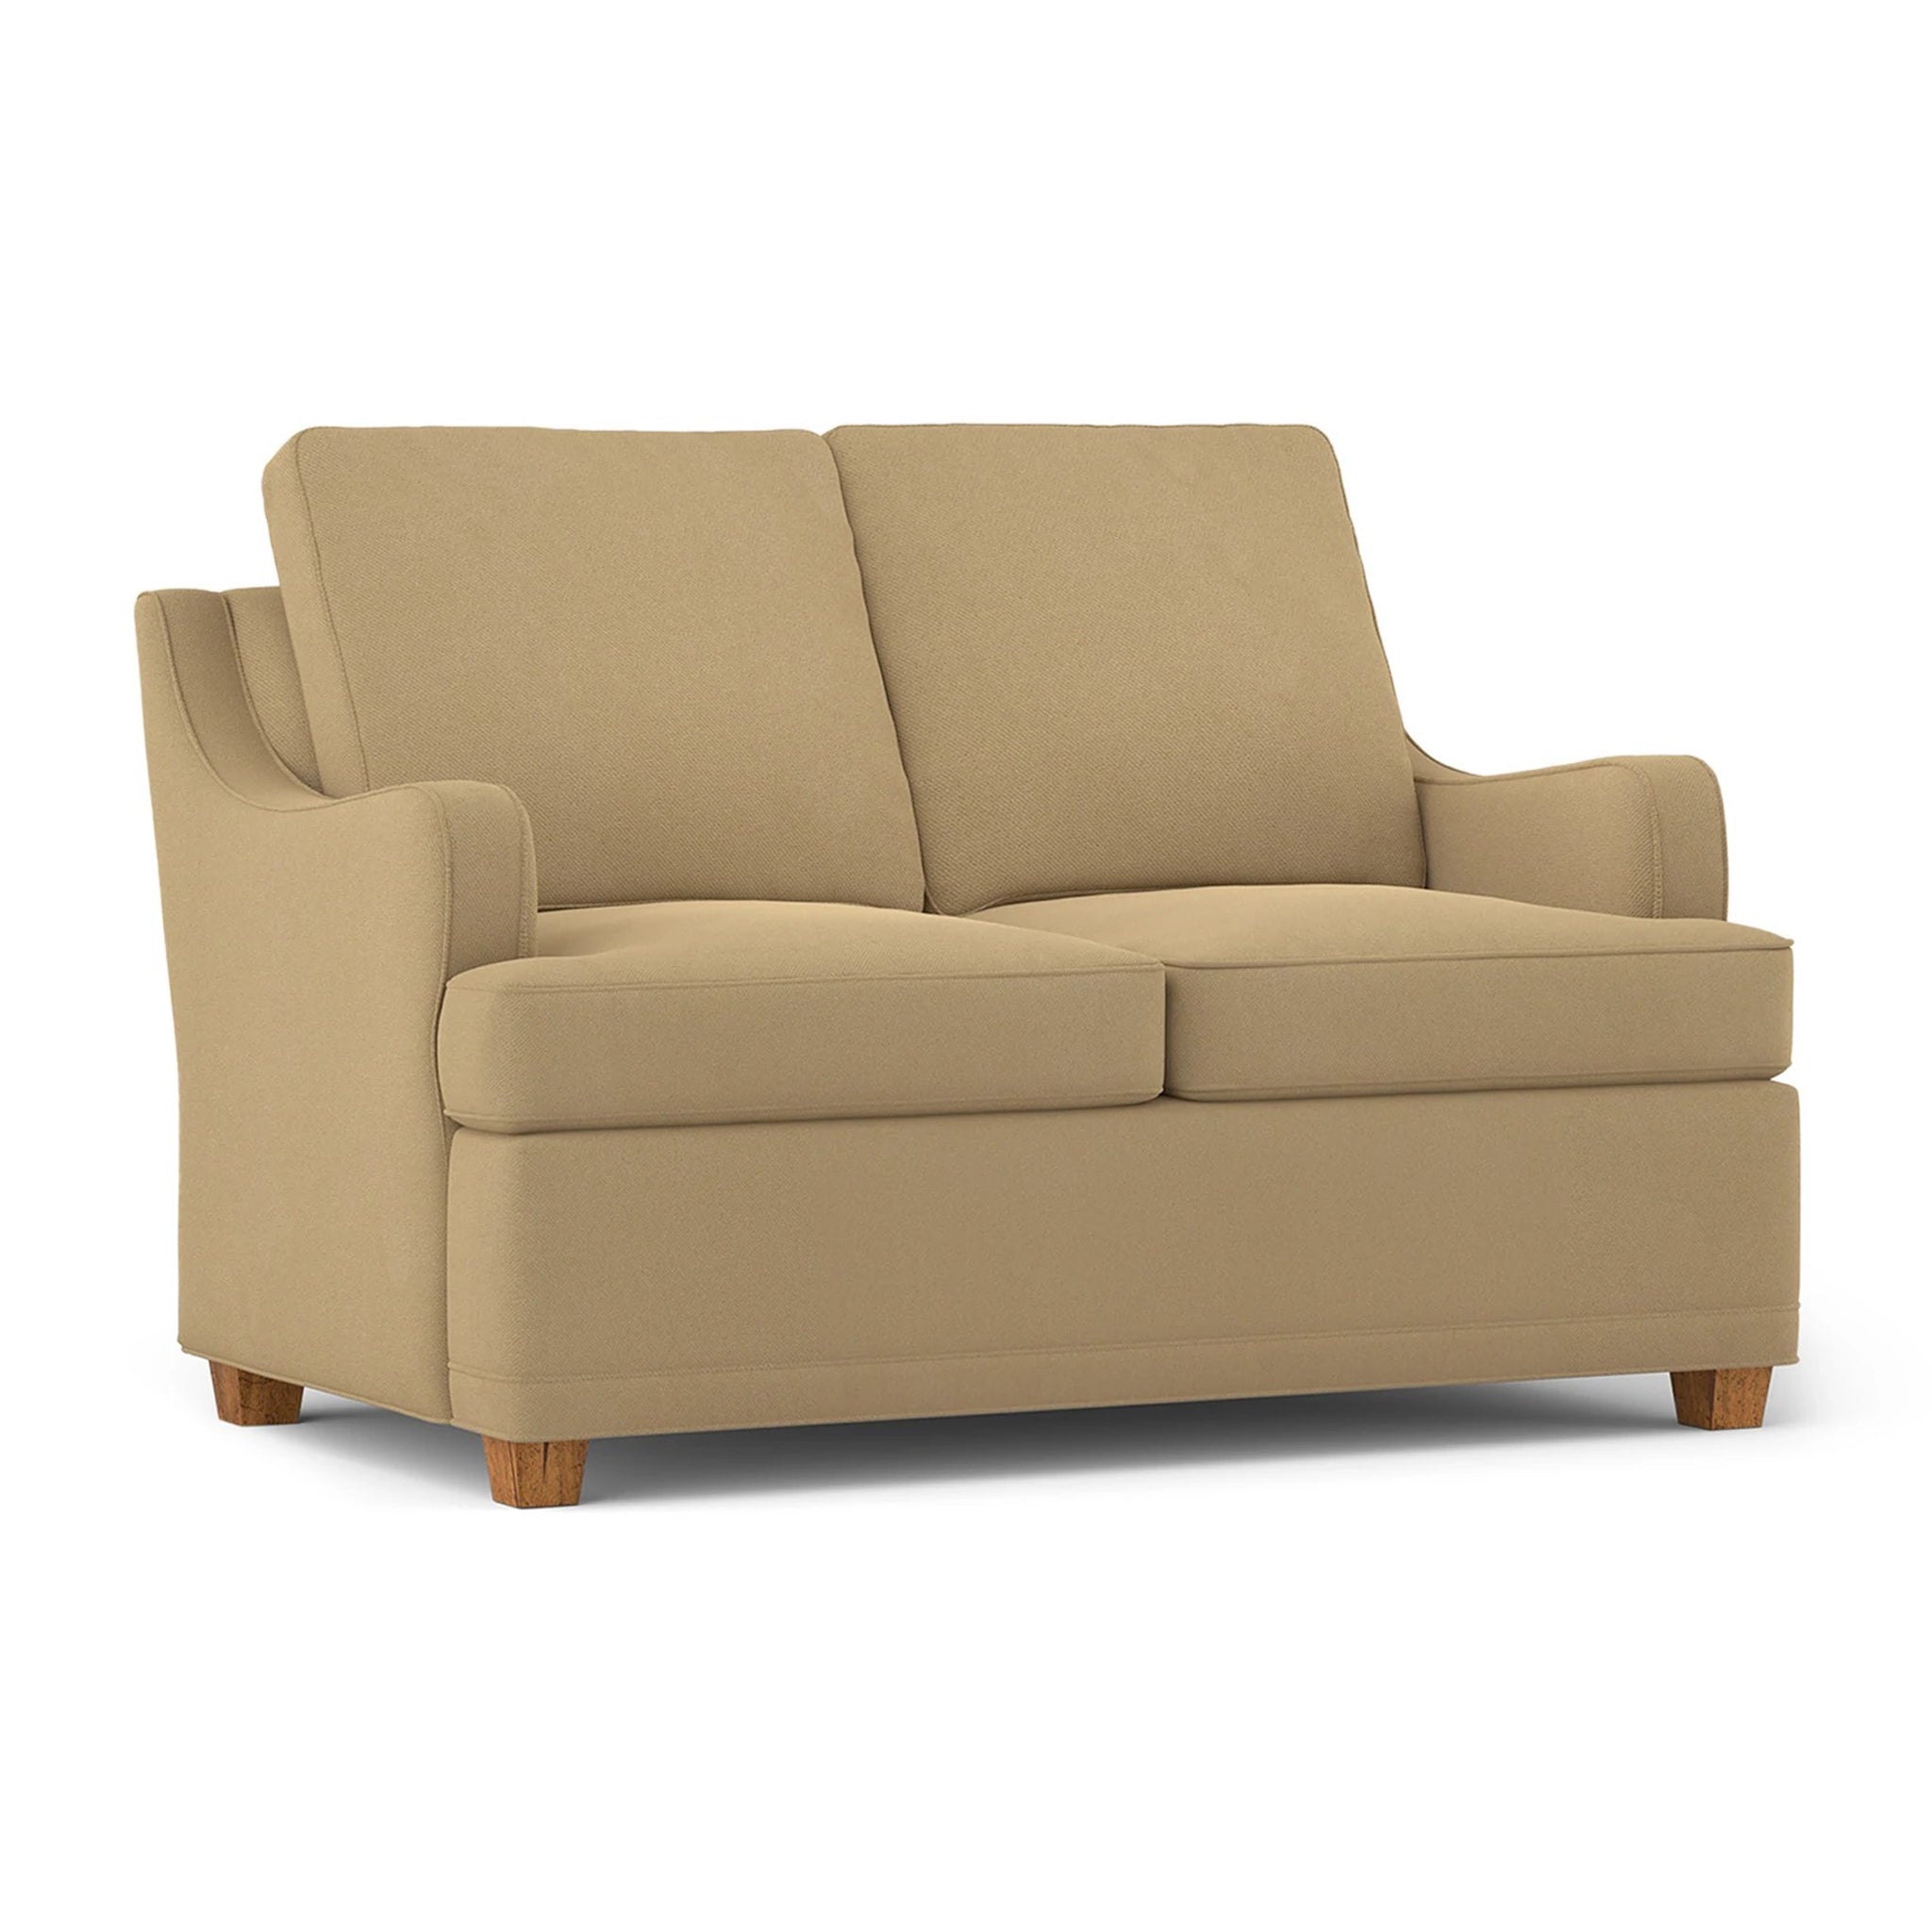 The Lyme Estate Collection - Loveseat